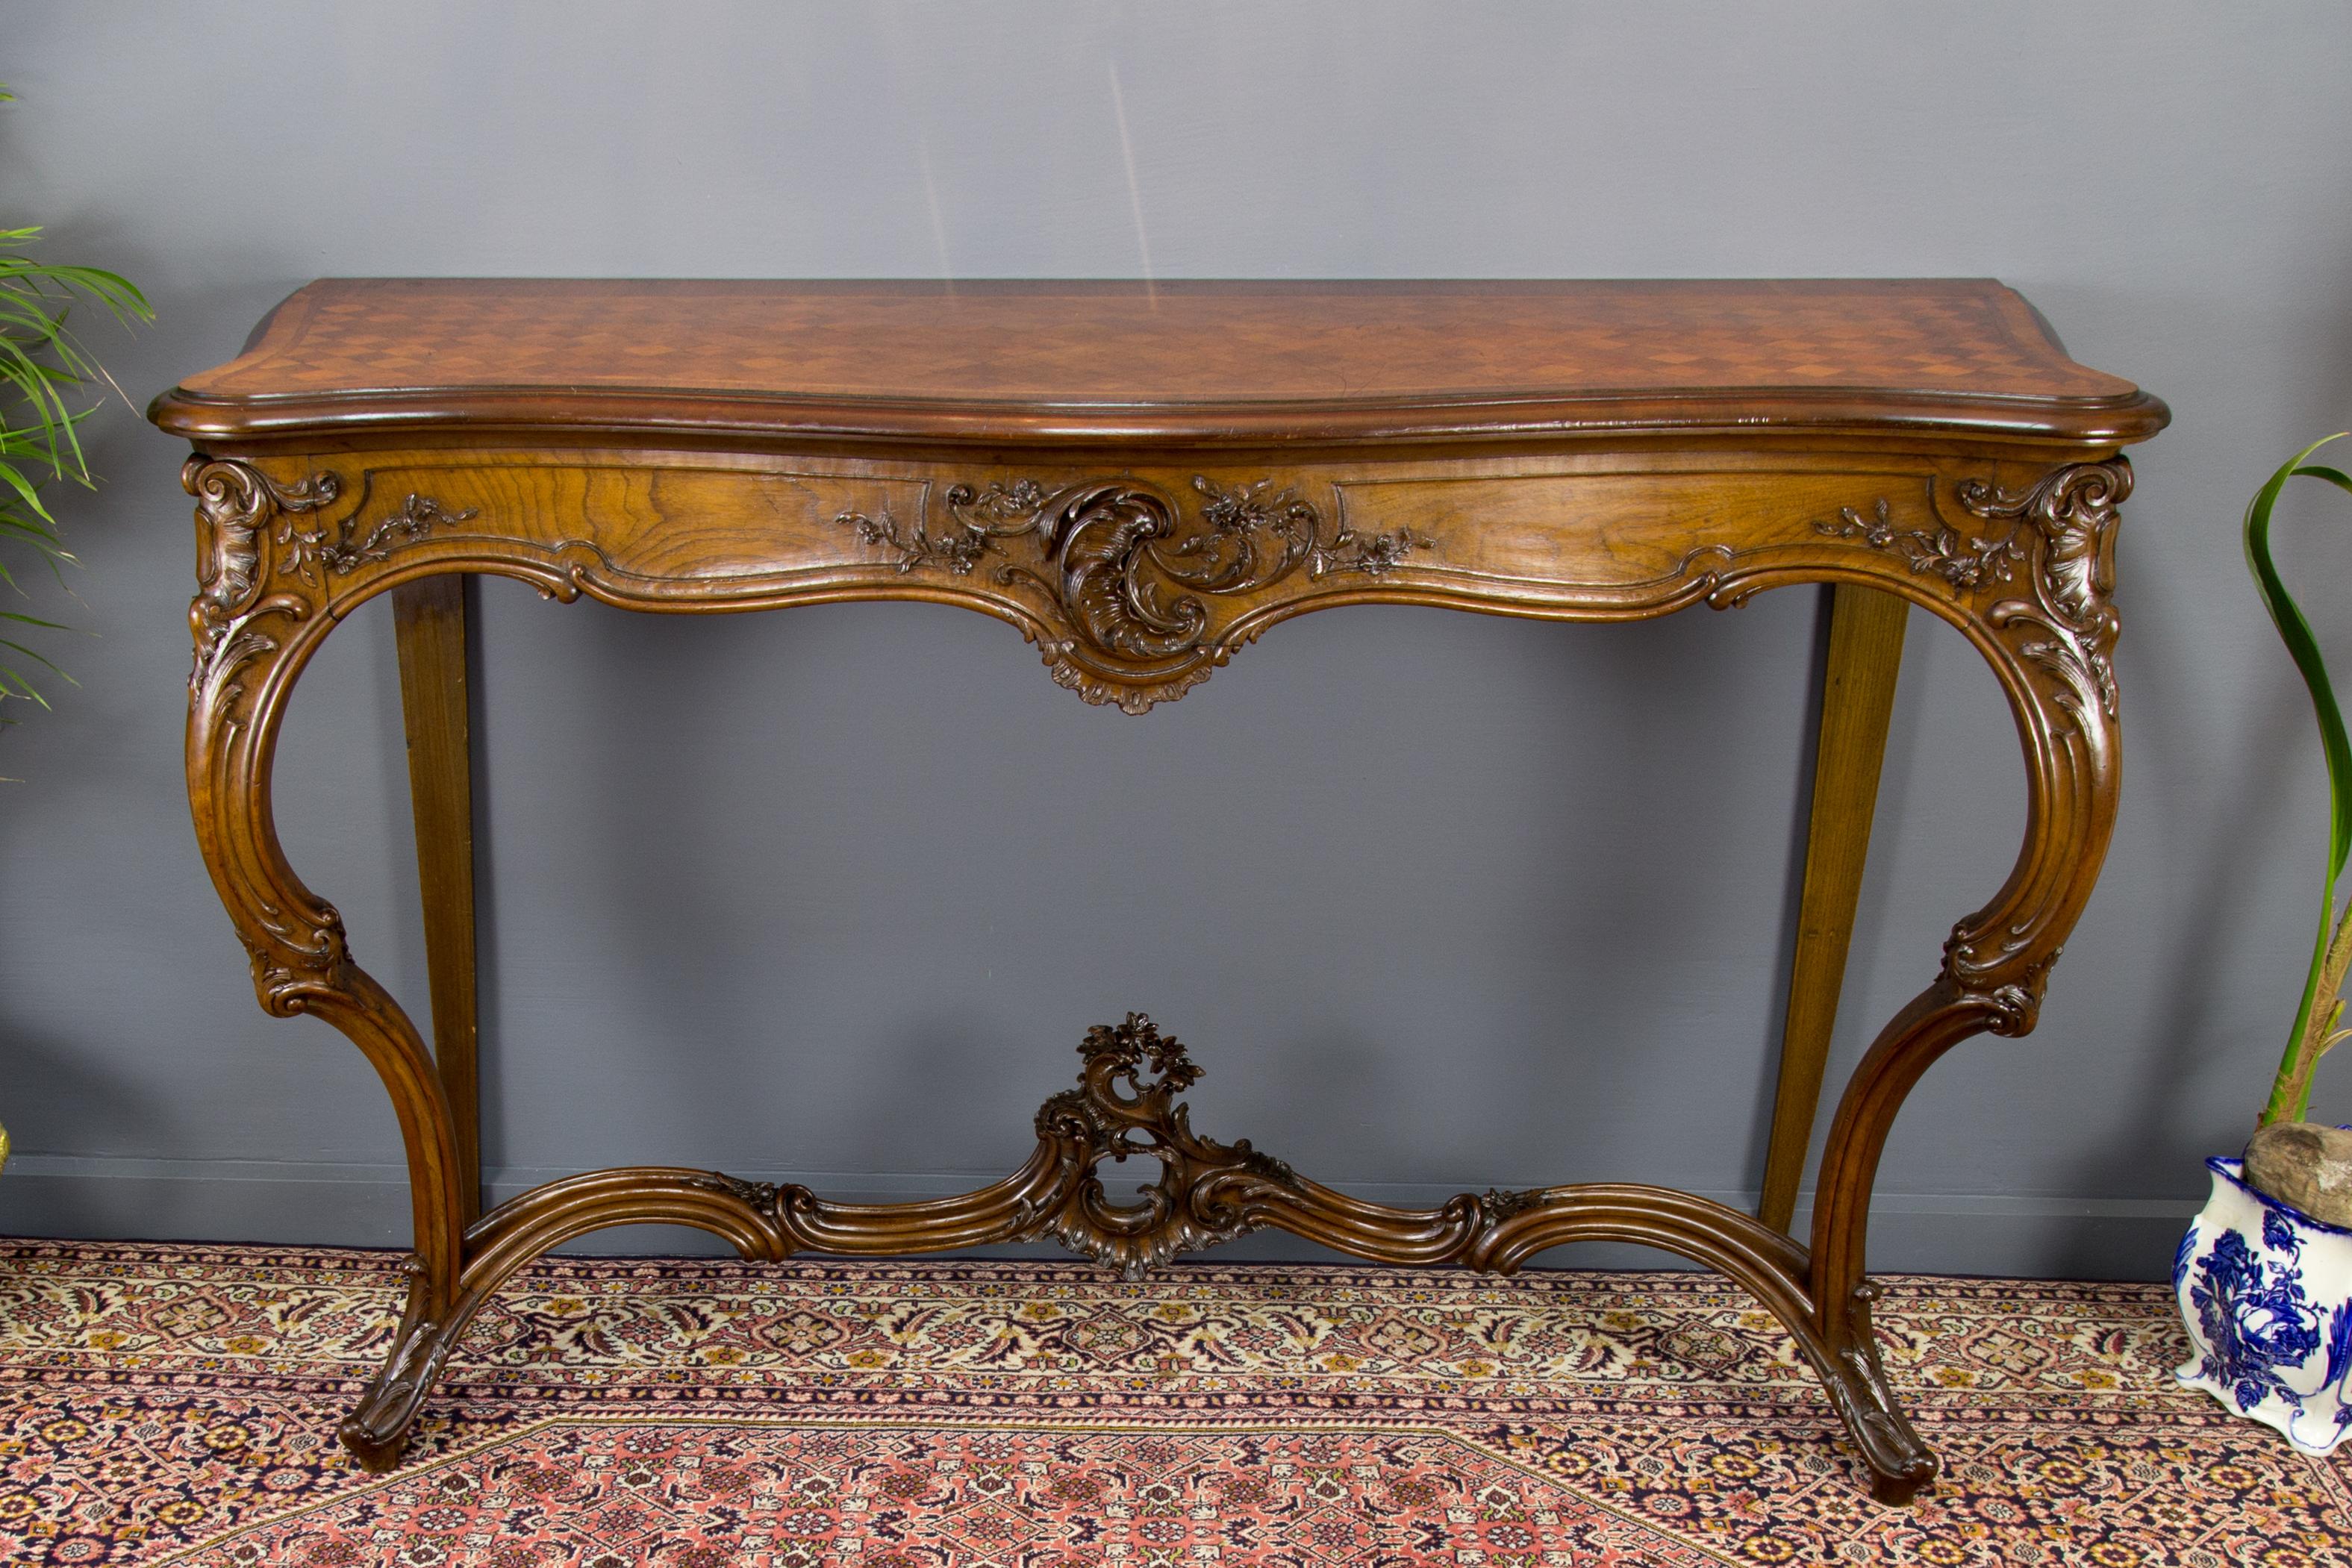 Exquisite beautifully carved walnut console with a crossbanded parquetry top. This large French Louis XV style console has finely carved rocaille, foliate and floral motifs. The well-molded front standing on finely carved Cabriole legs joined by a